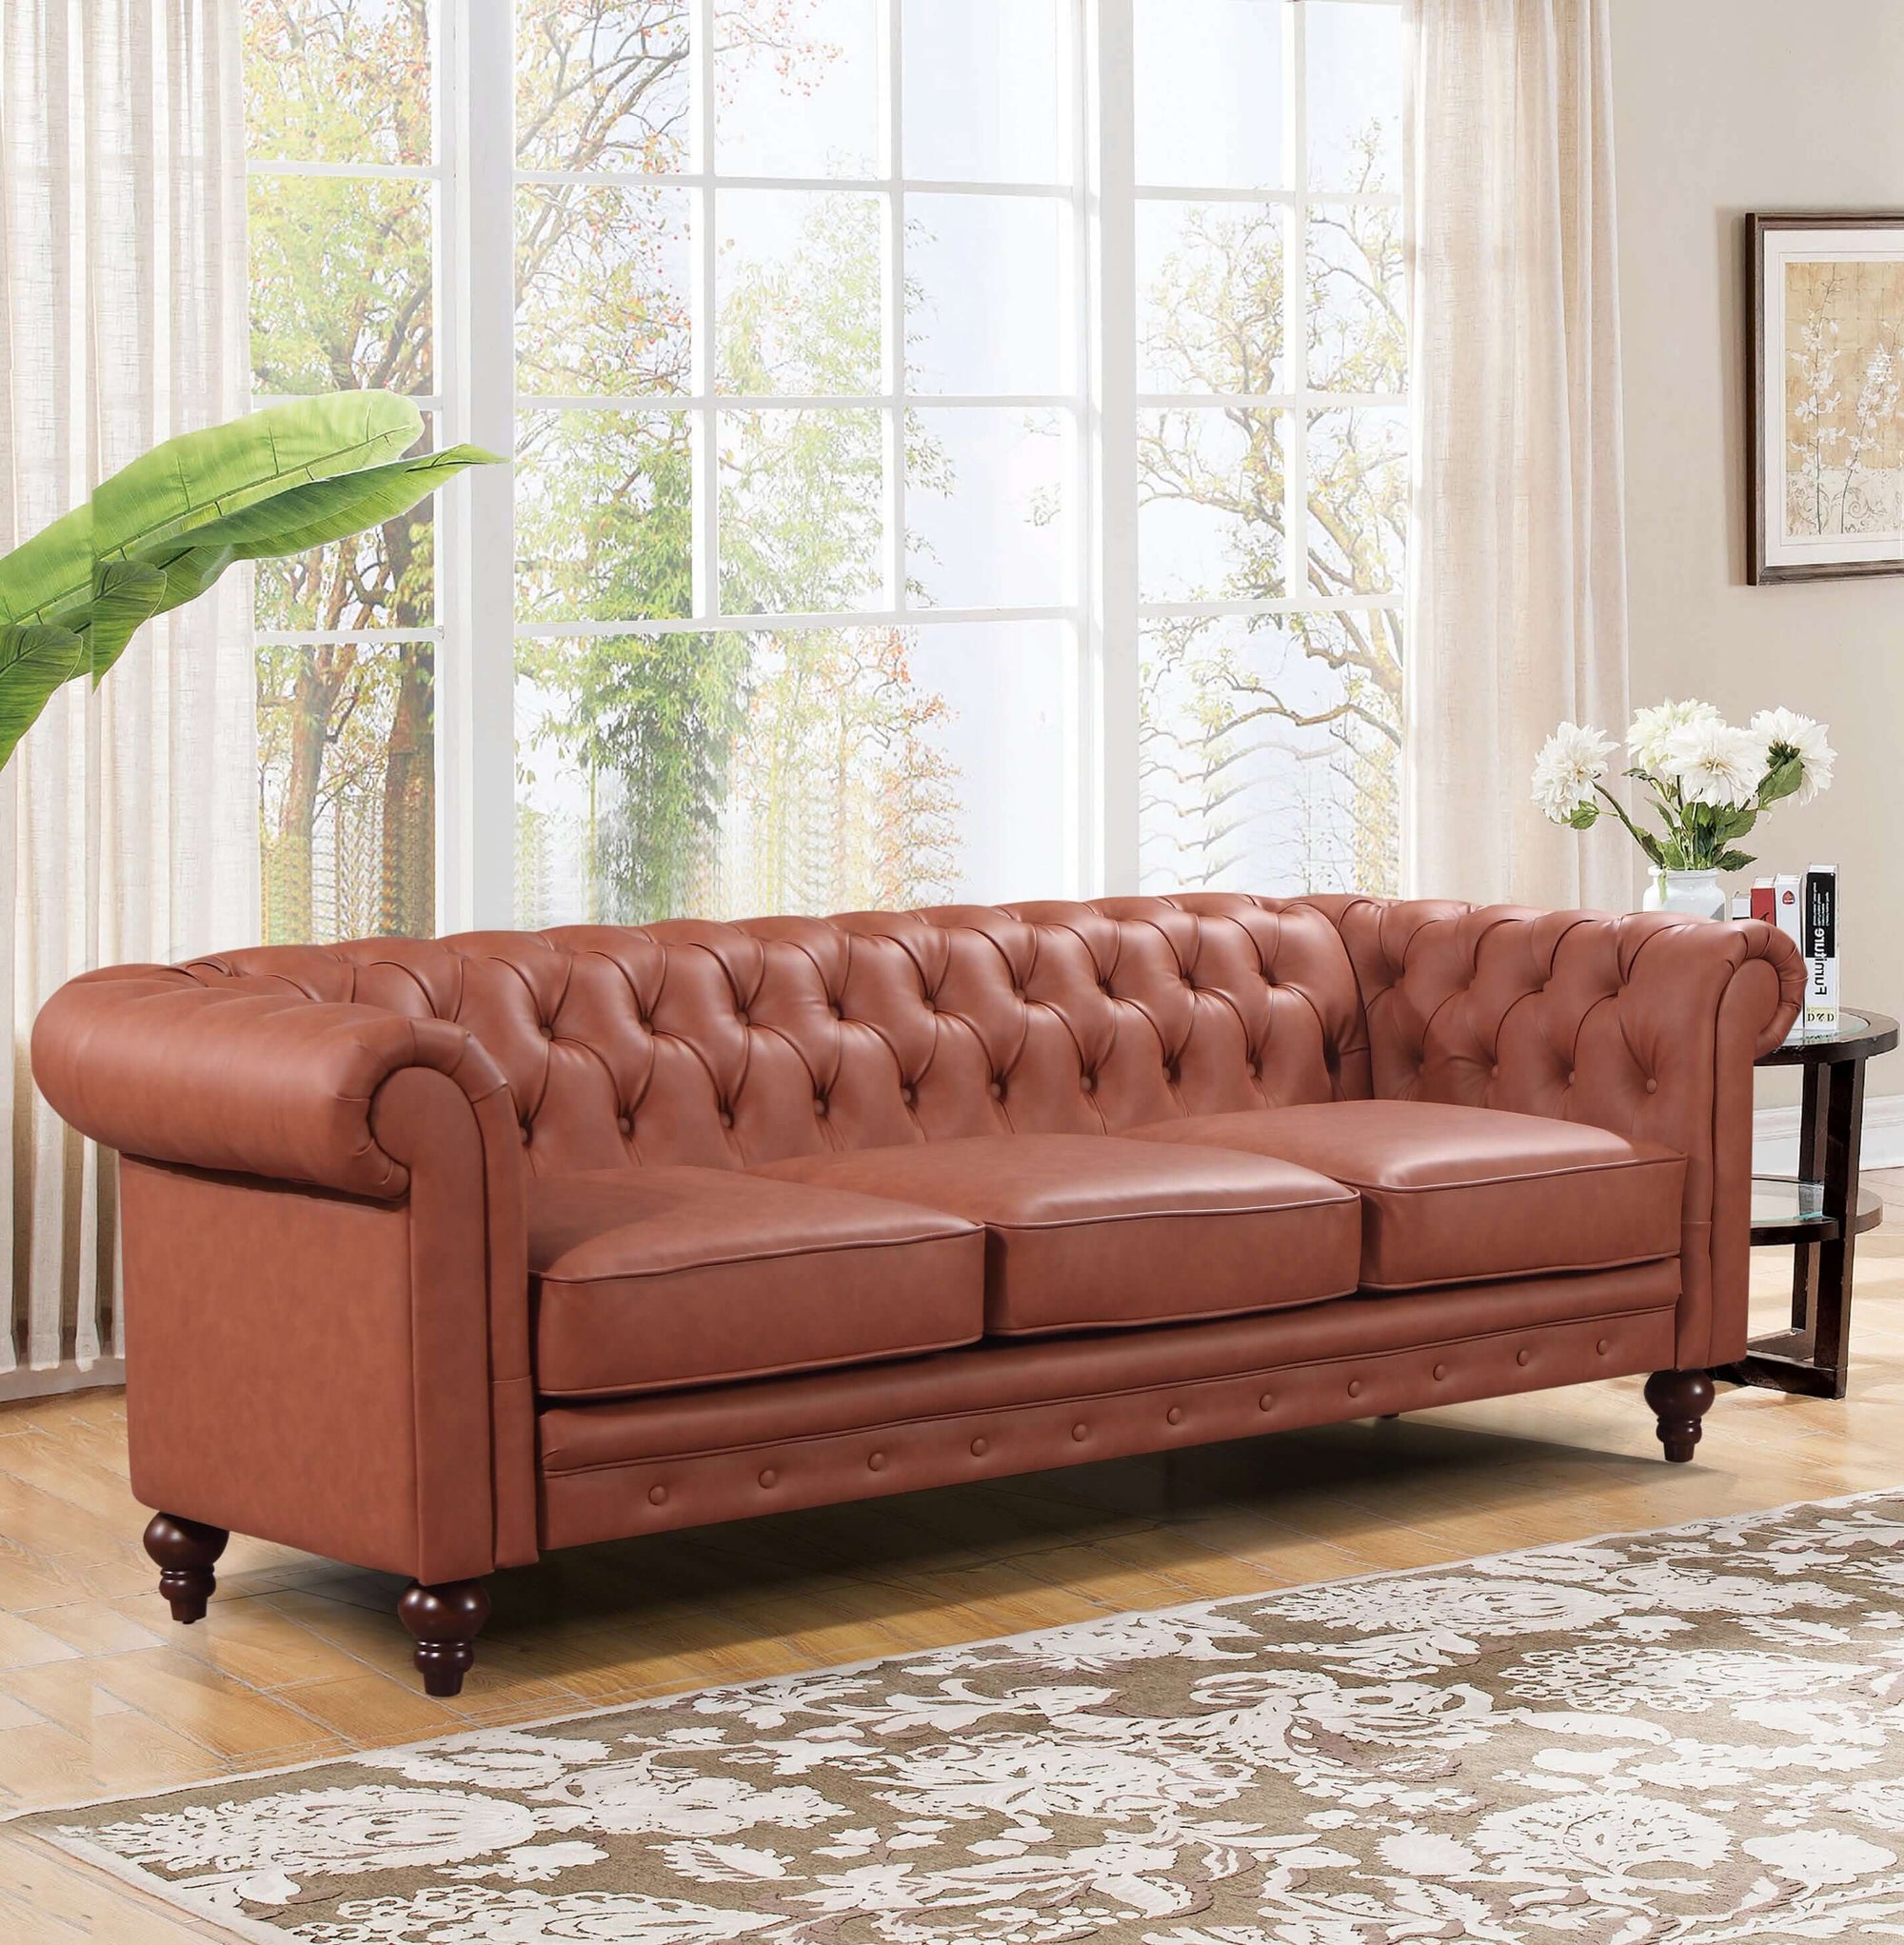 3 Seater Brown Sofa Lounge Chesterfireld Style Button Tufted in Faux Leather-Upinteriors